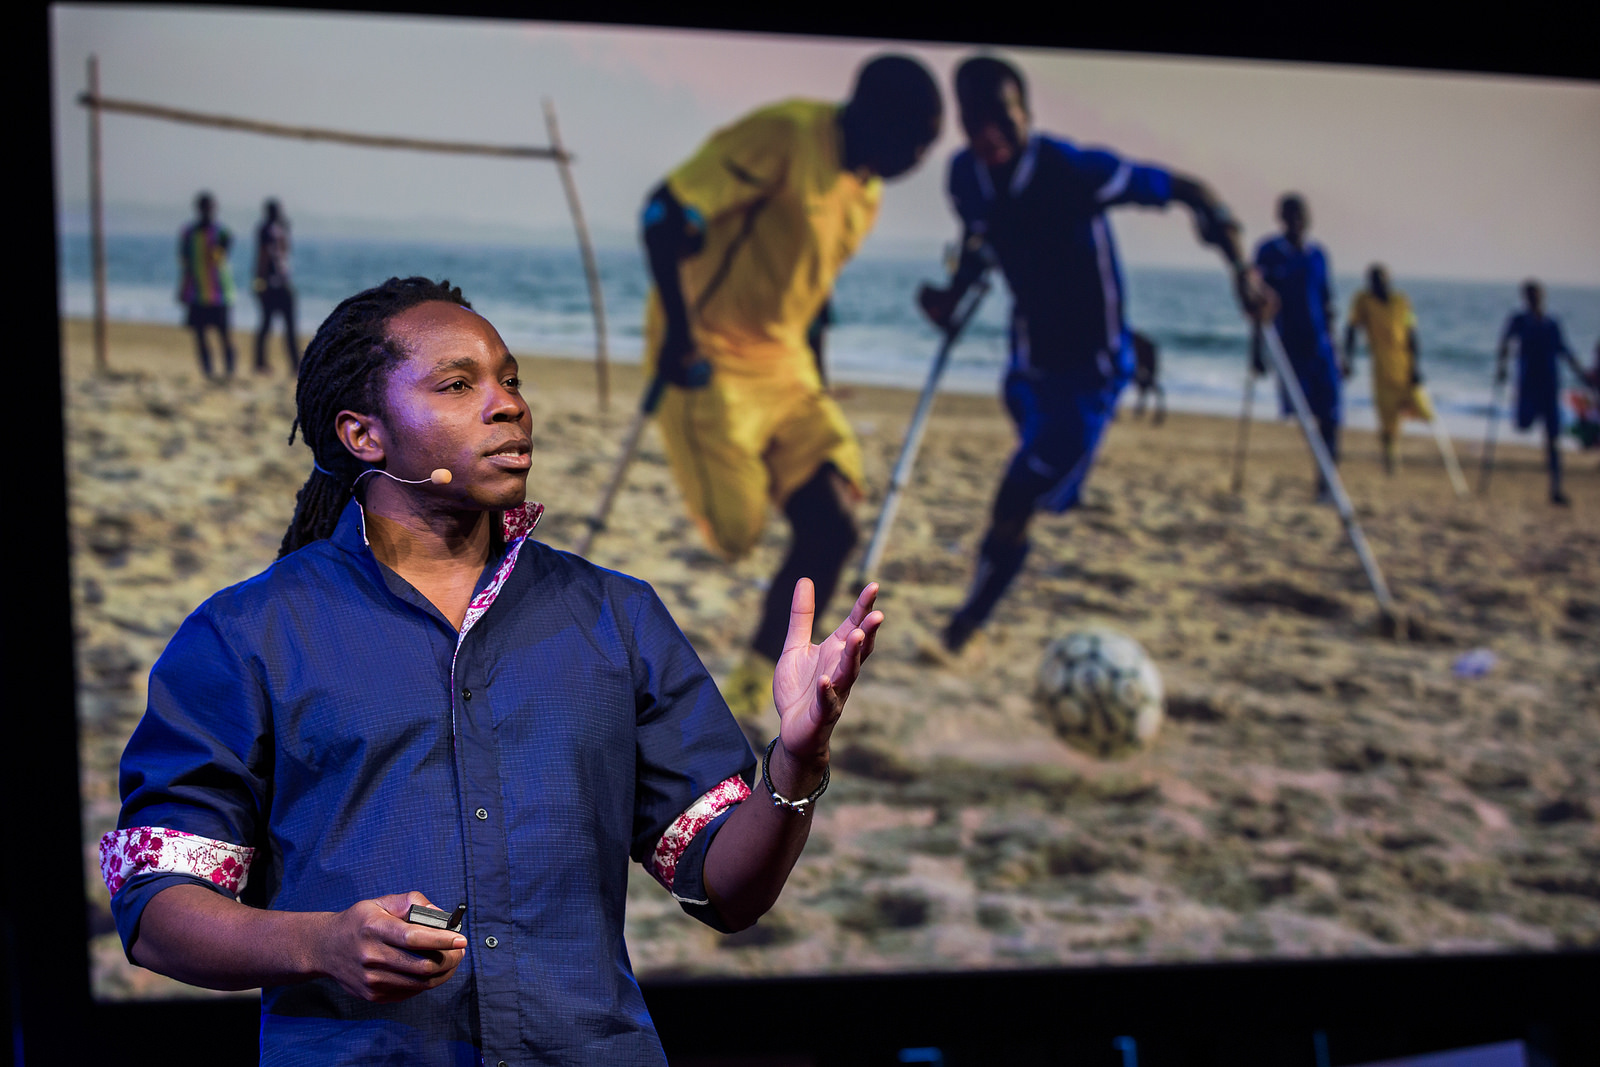 Speaking of Hugh Herr's team at the MIT Media Lab, David Sengeh works there. And is dedicated to offering good options to amputees in his home country of Sierra Leone. Photo: Ryan Lash